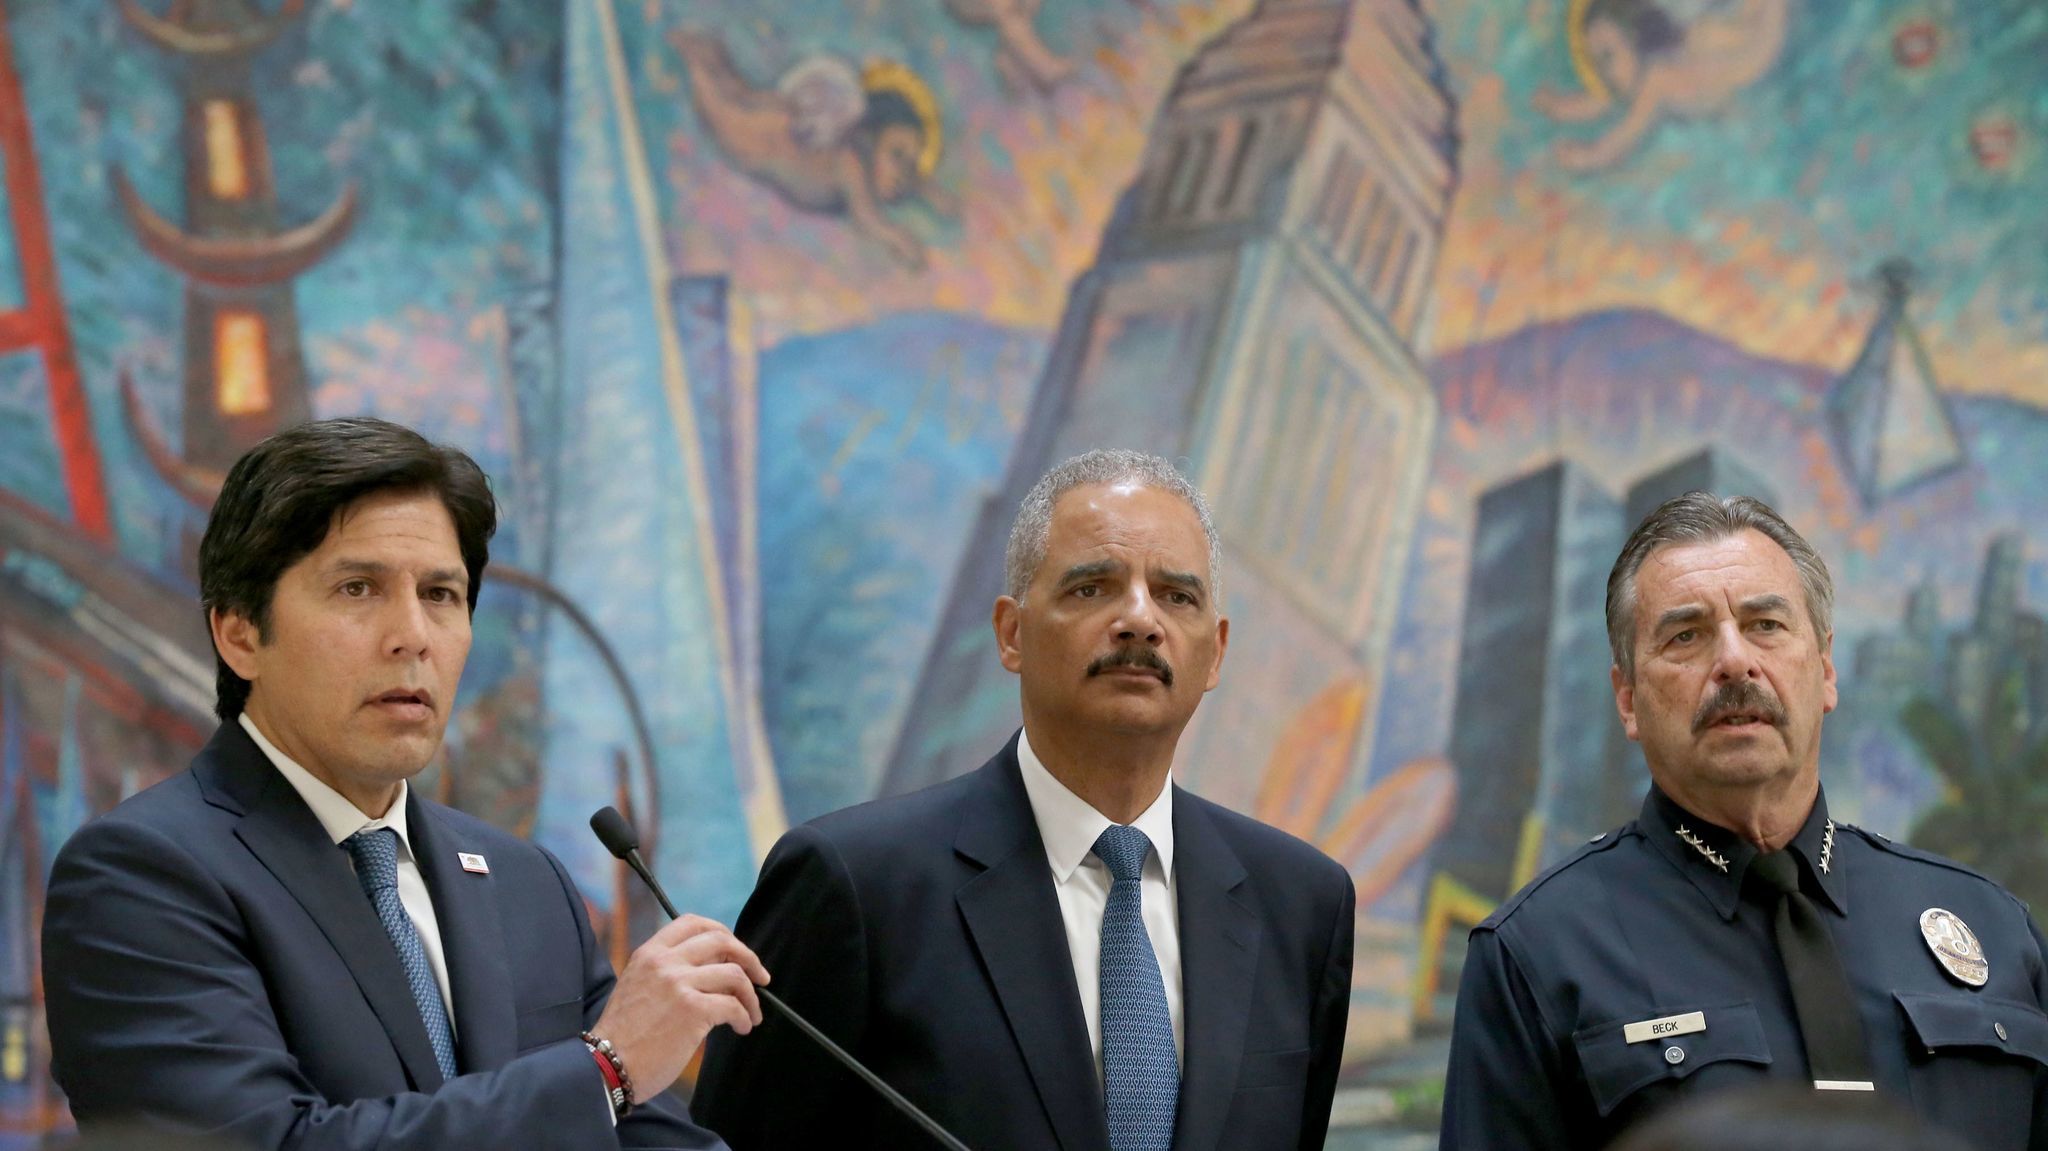 Senate leader Kevin de León, left, answers questions during a news conference to address the so-called sanctuary state bill while Former U.S. Atty. Gen. Eric Holder, center, and LAPD Chief Charlie Beck listen.